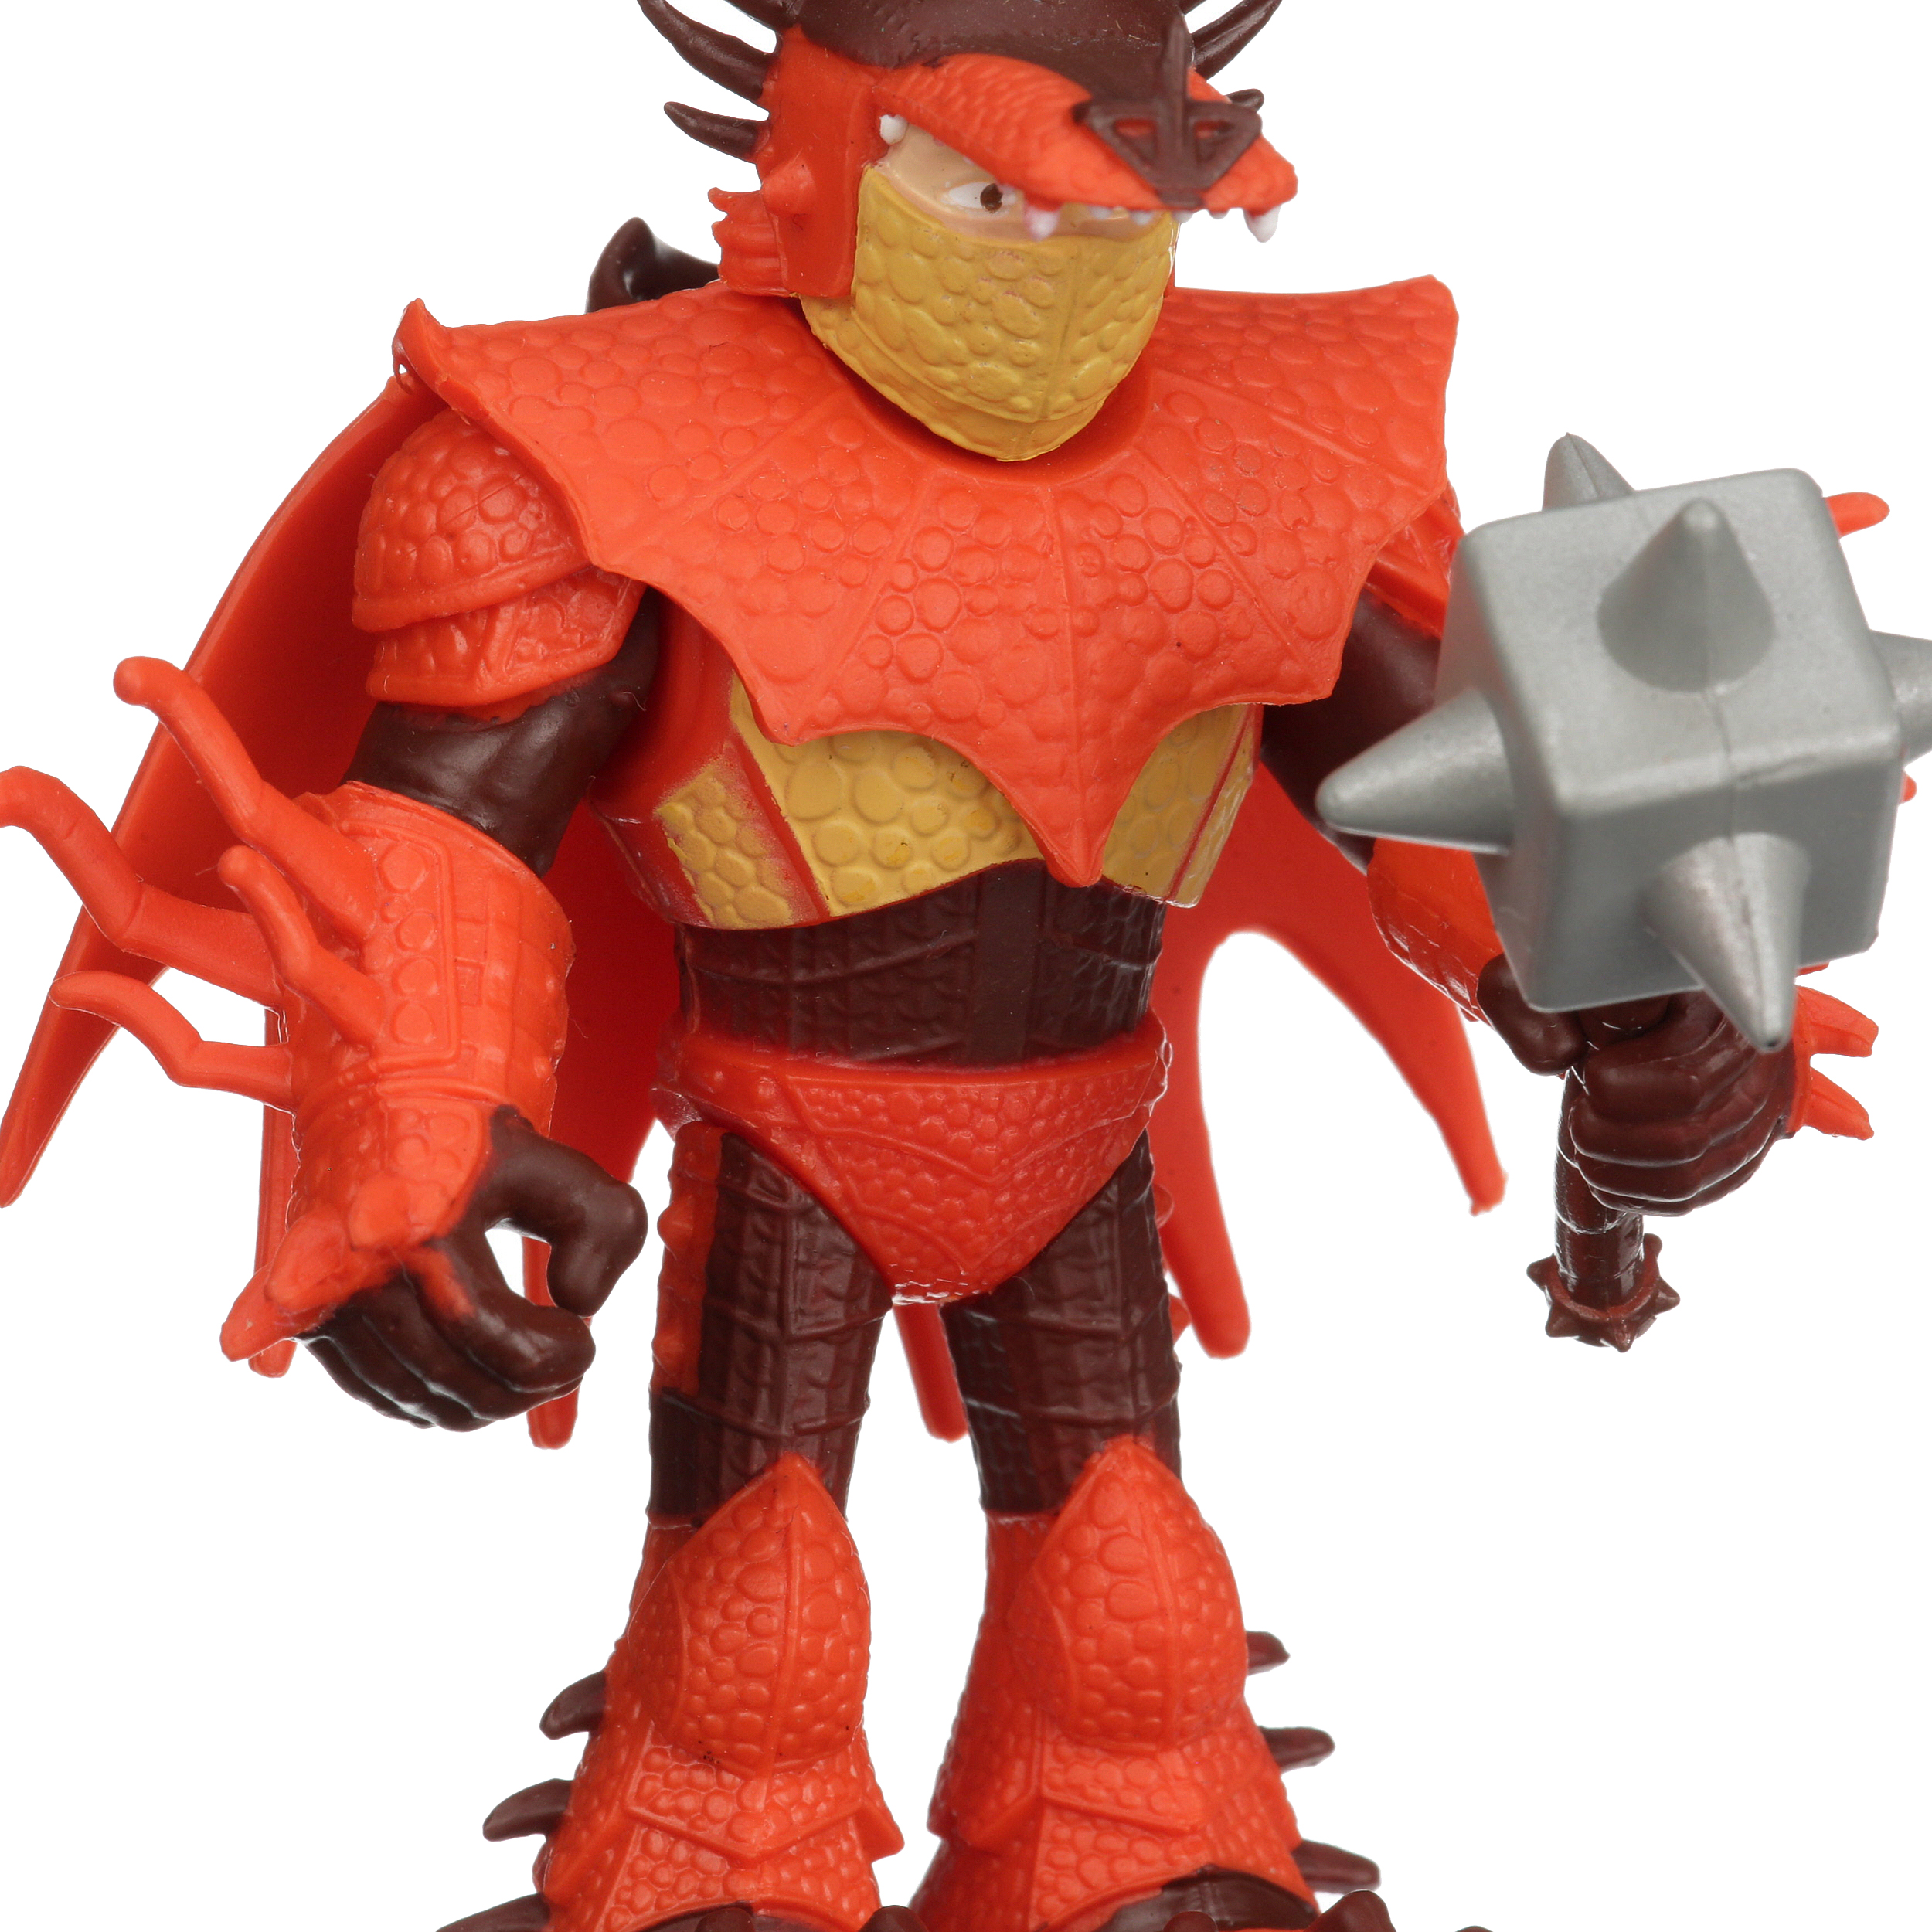 DreamWorks Dragons, Hookfang and Snotlout, Dragon with Armored Viking Figure, for Kids Aged 4 and Up - image 5 of 7